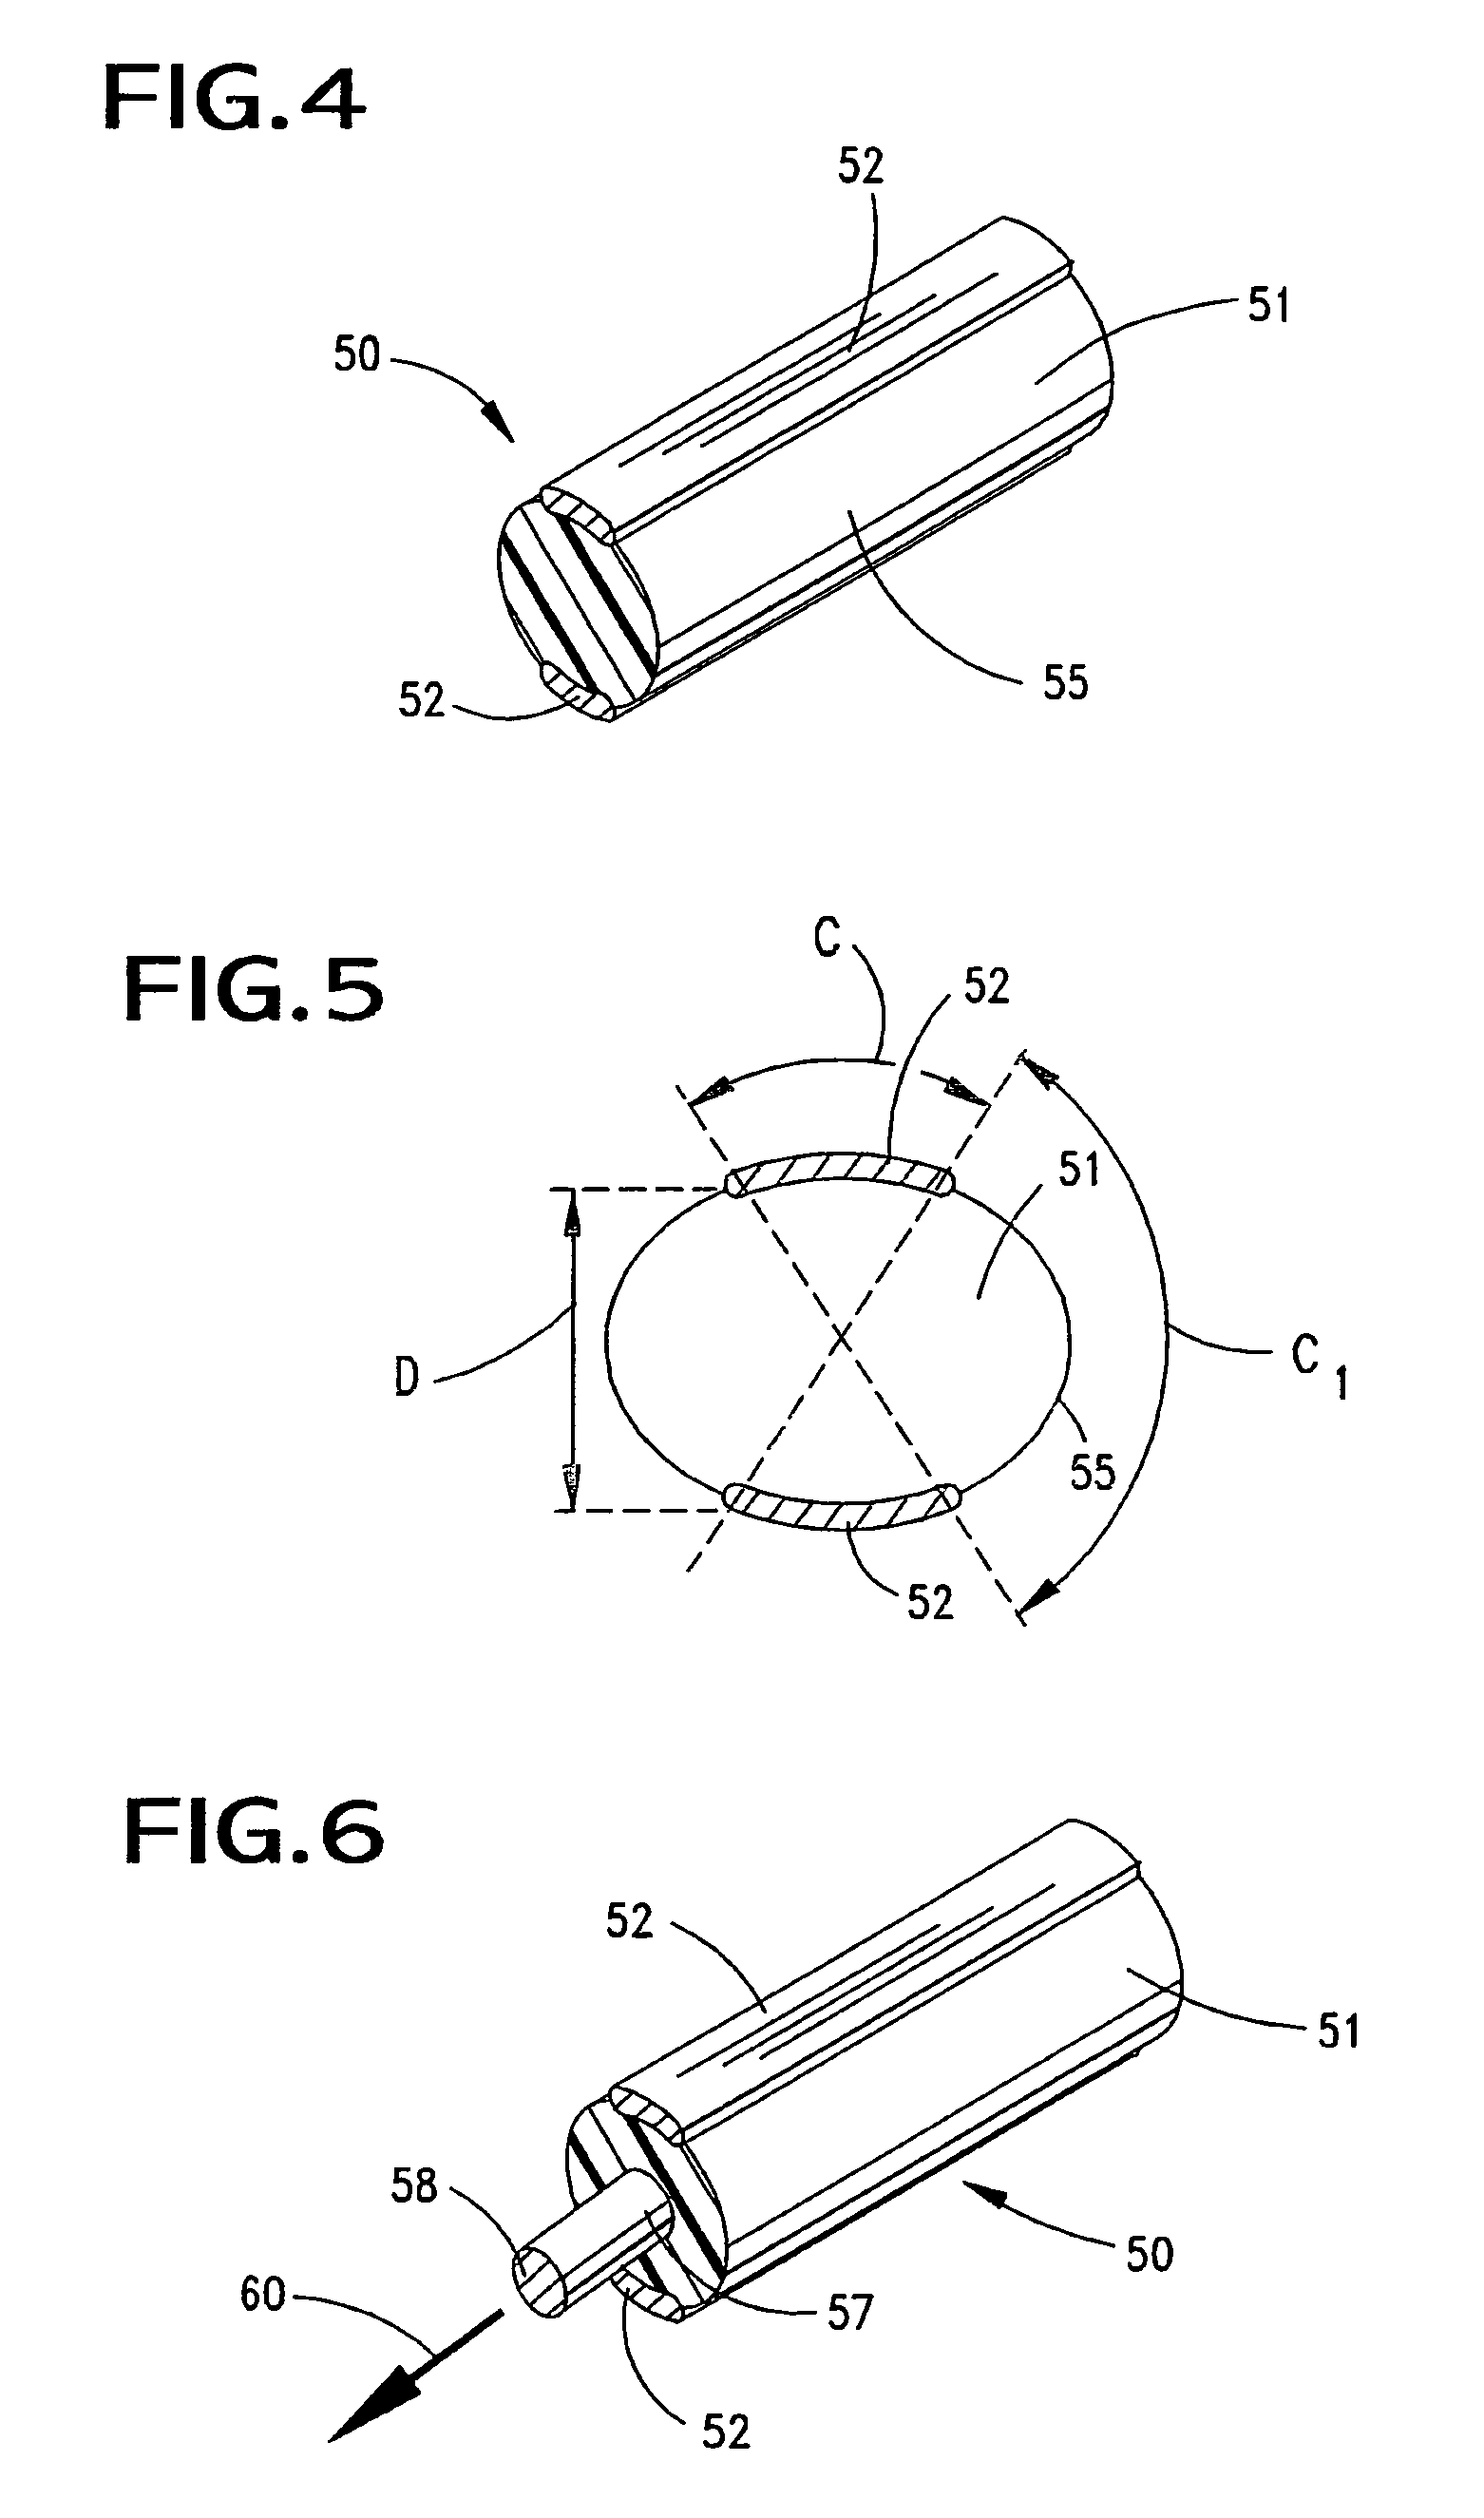 Grouped element transmission channel link with pedestal aspects